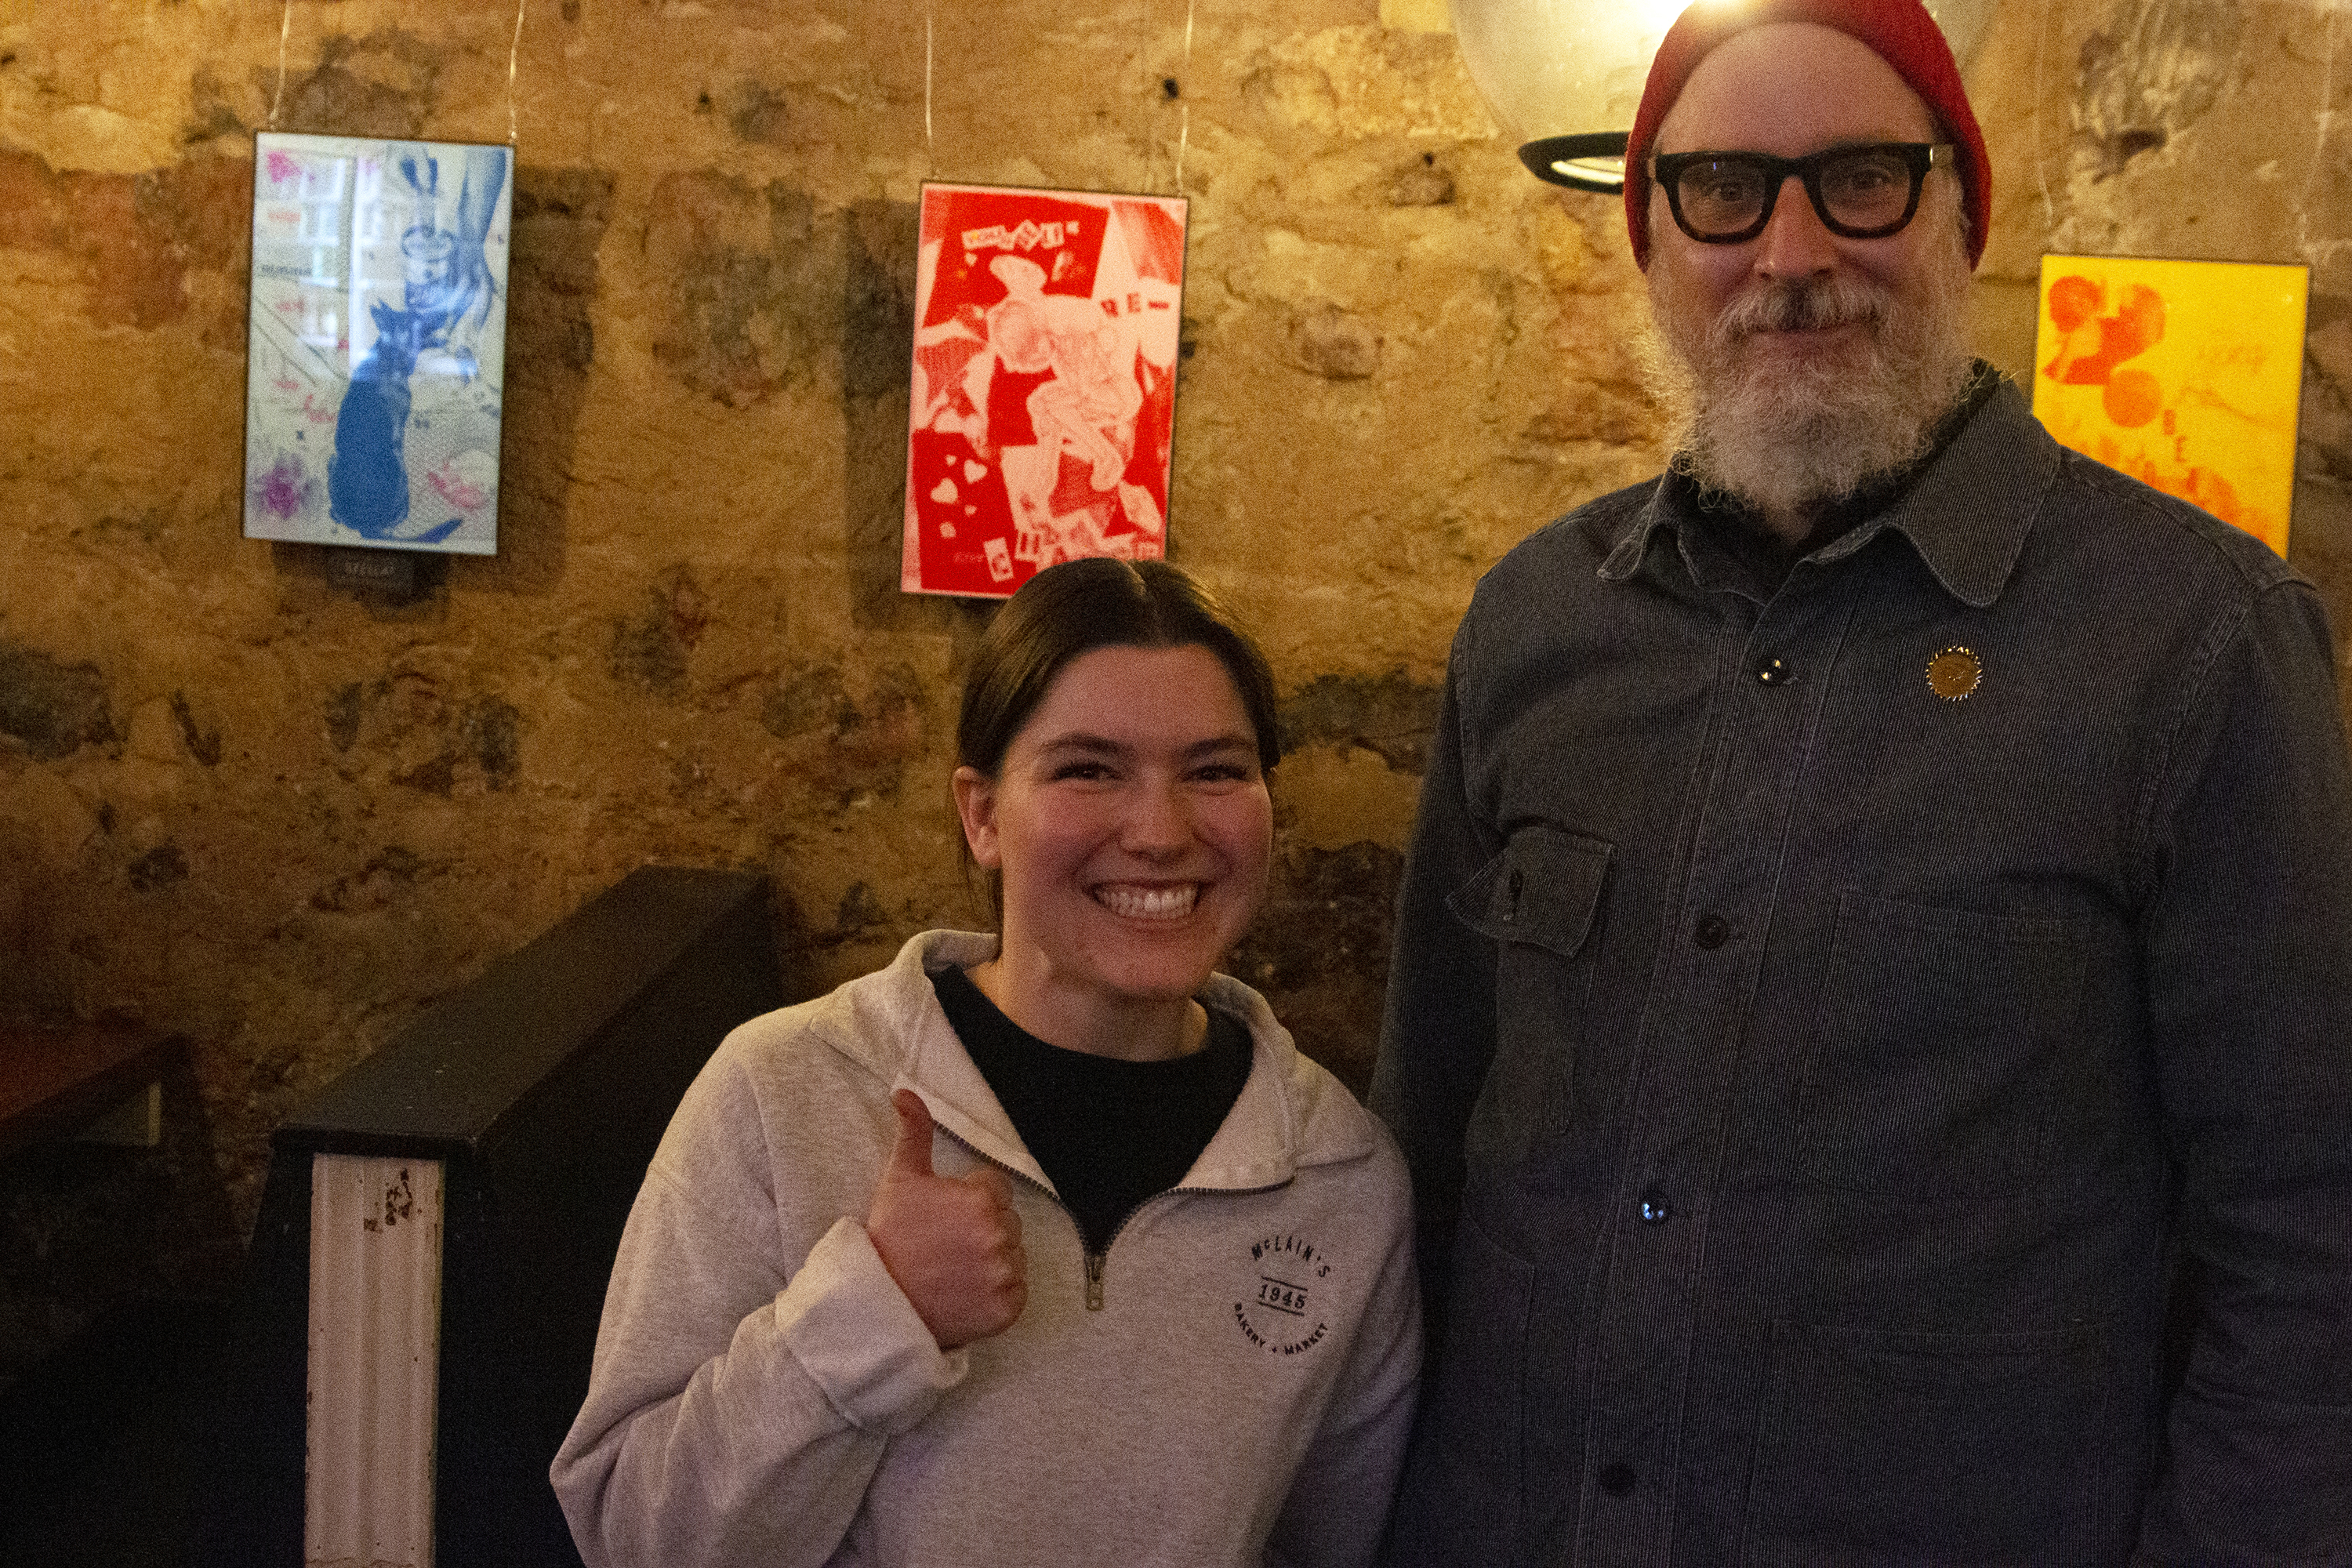 L to R: Annie Myers, Undergraduate Design Research Assistant and RISO Fellow and Ryan D. Clifford, Assistant Professor of Design and Visual Communication